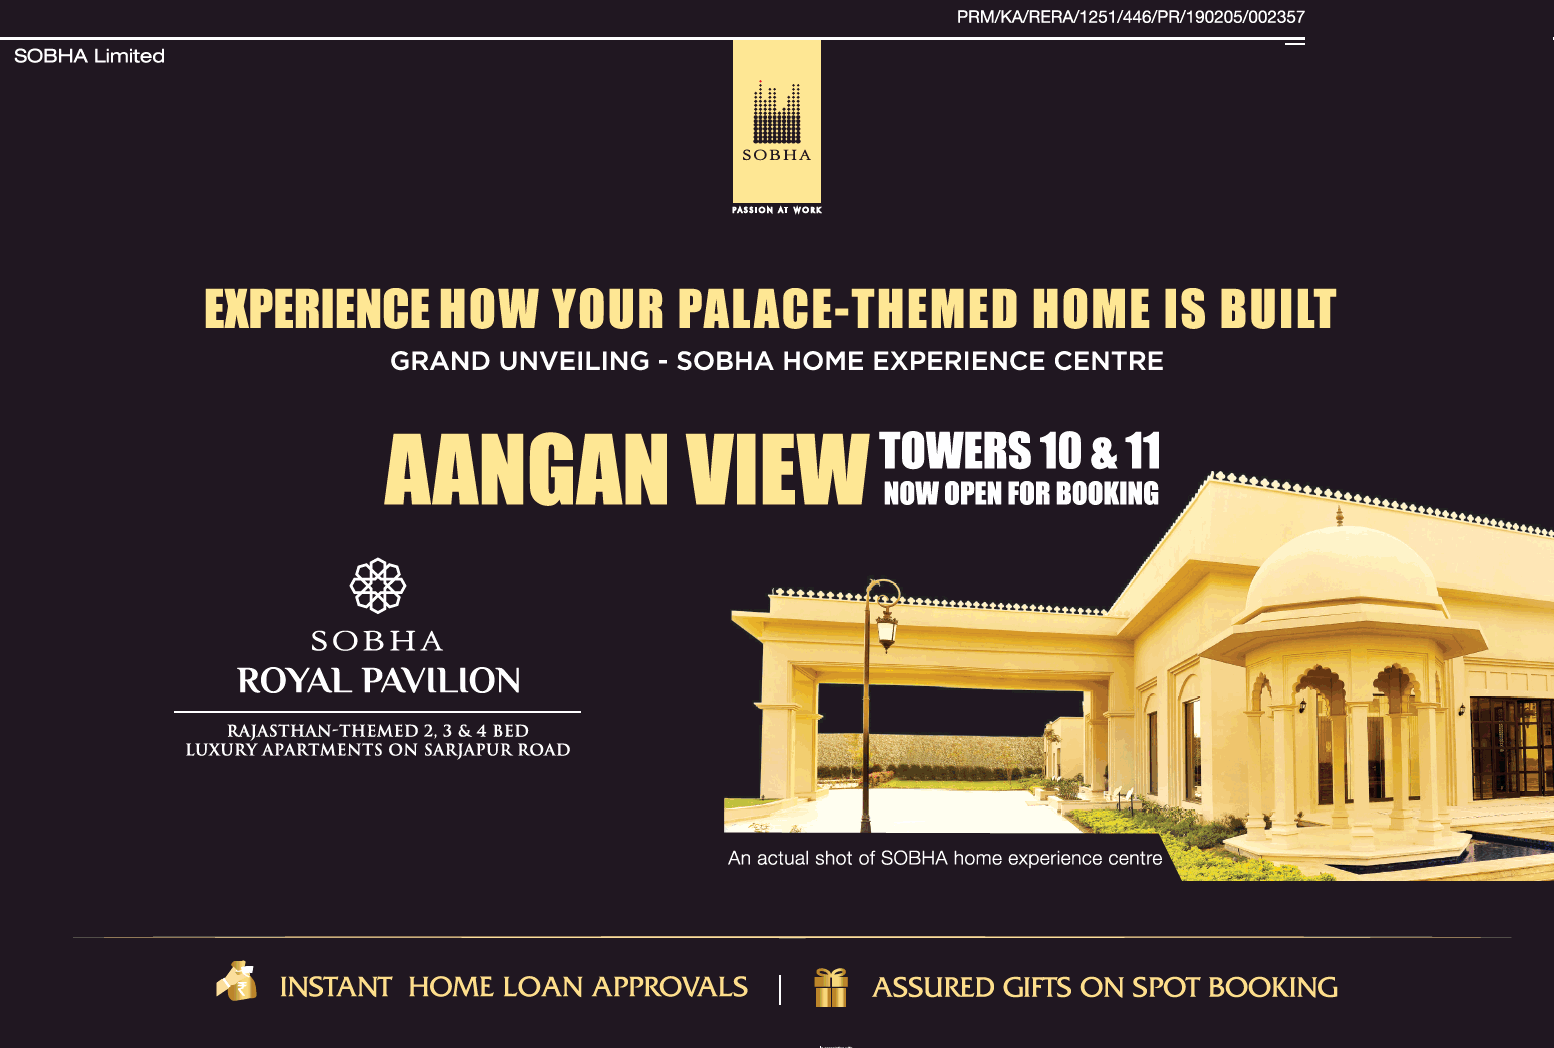 Rajasthan themed 2, 3 and 4 BHK luxury apartments at Sobha Royal Pavilion in Bangalore